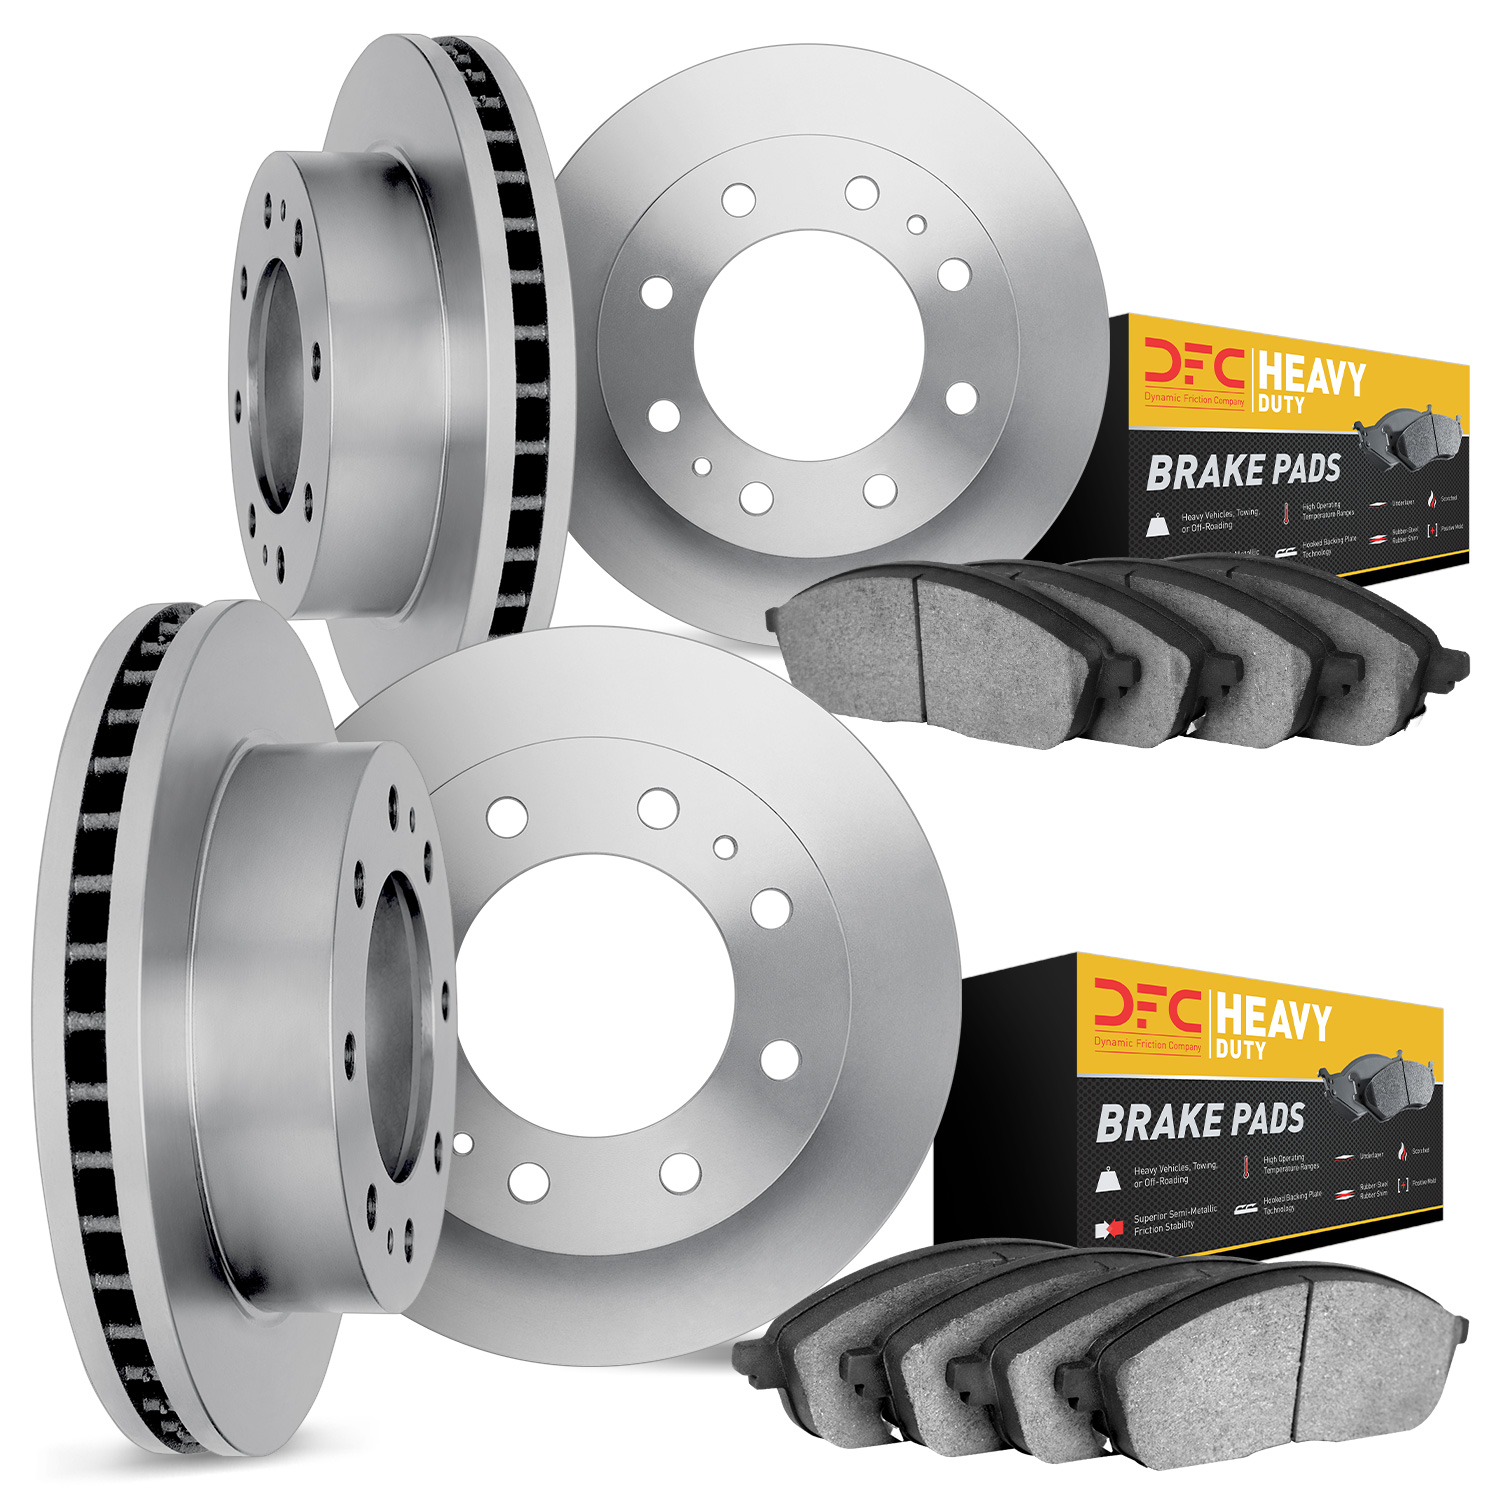 6204-99312 Brake Rotors w/Heavy-Duty Brake Pads Kit, Fits Select Ford/Lincoln/Mercury/Mazda, Position: Front and Rear